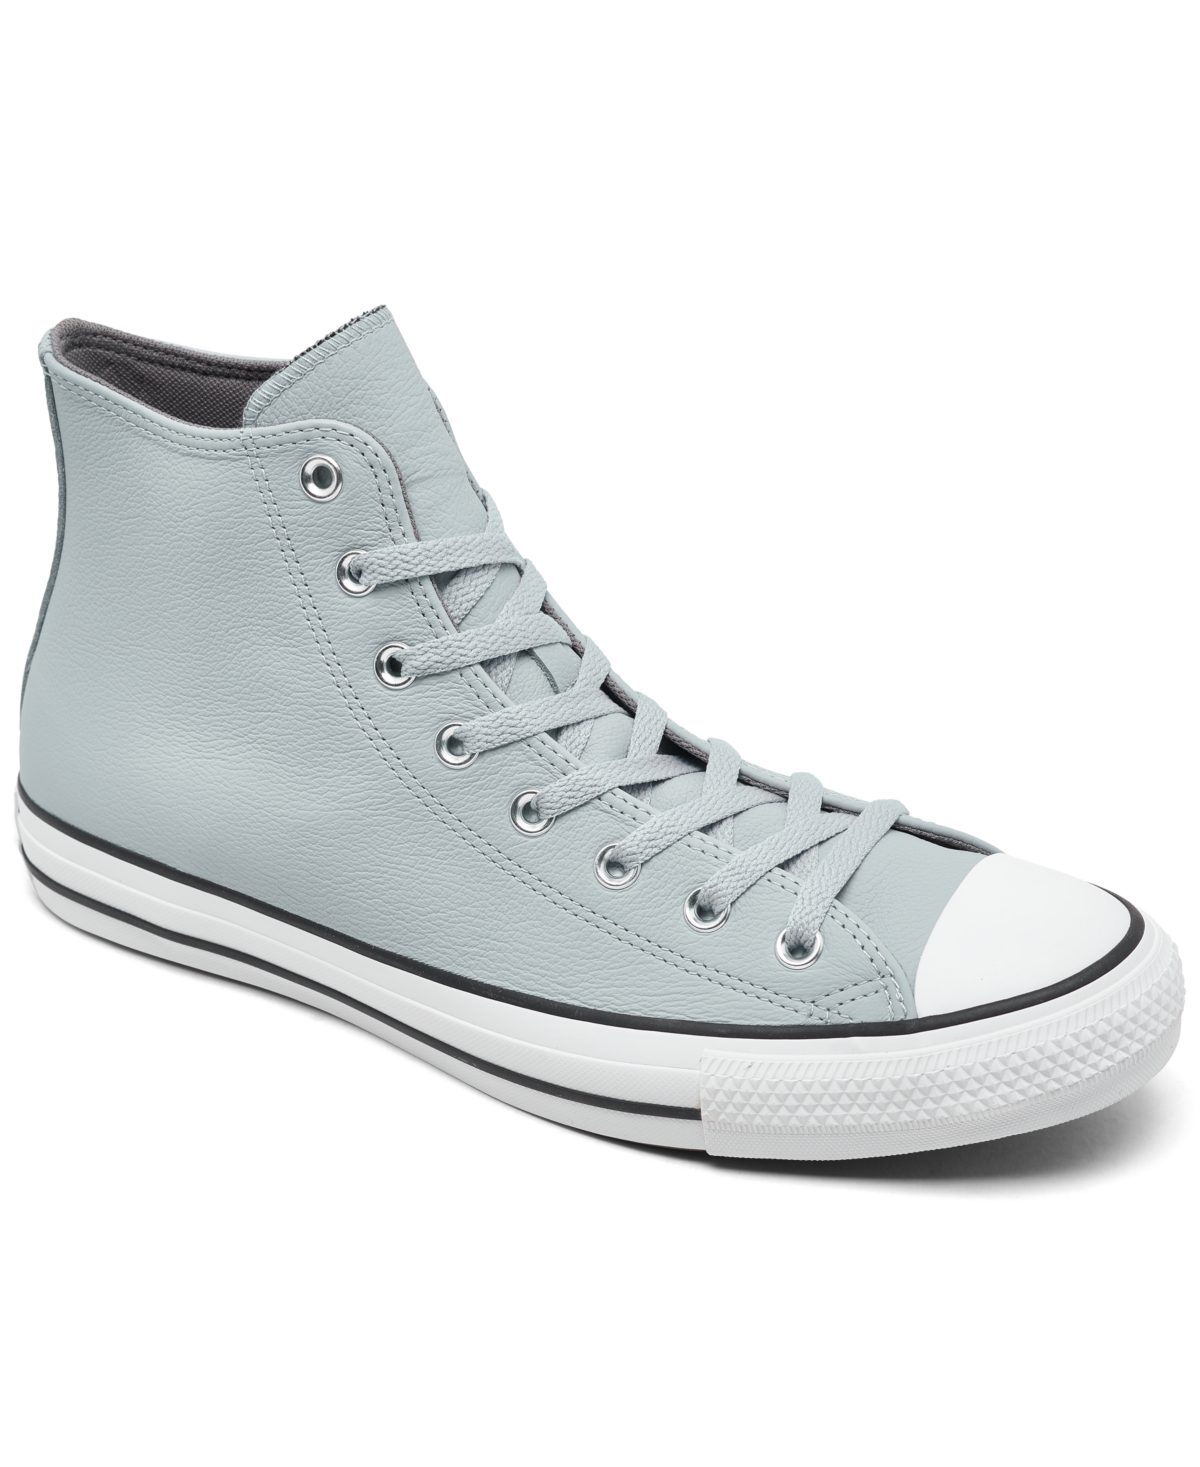 Men's Chuck Taylor All Star Leather High Top Casual Sneakers from Finish Line - Heirloom Silver